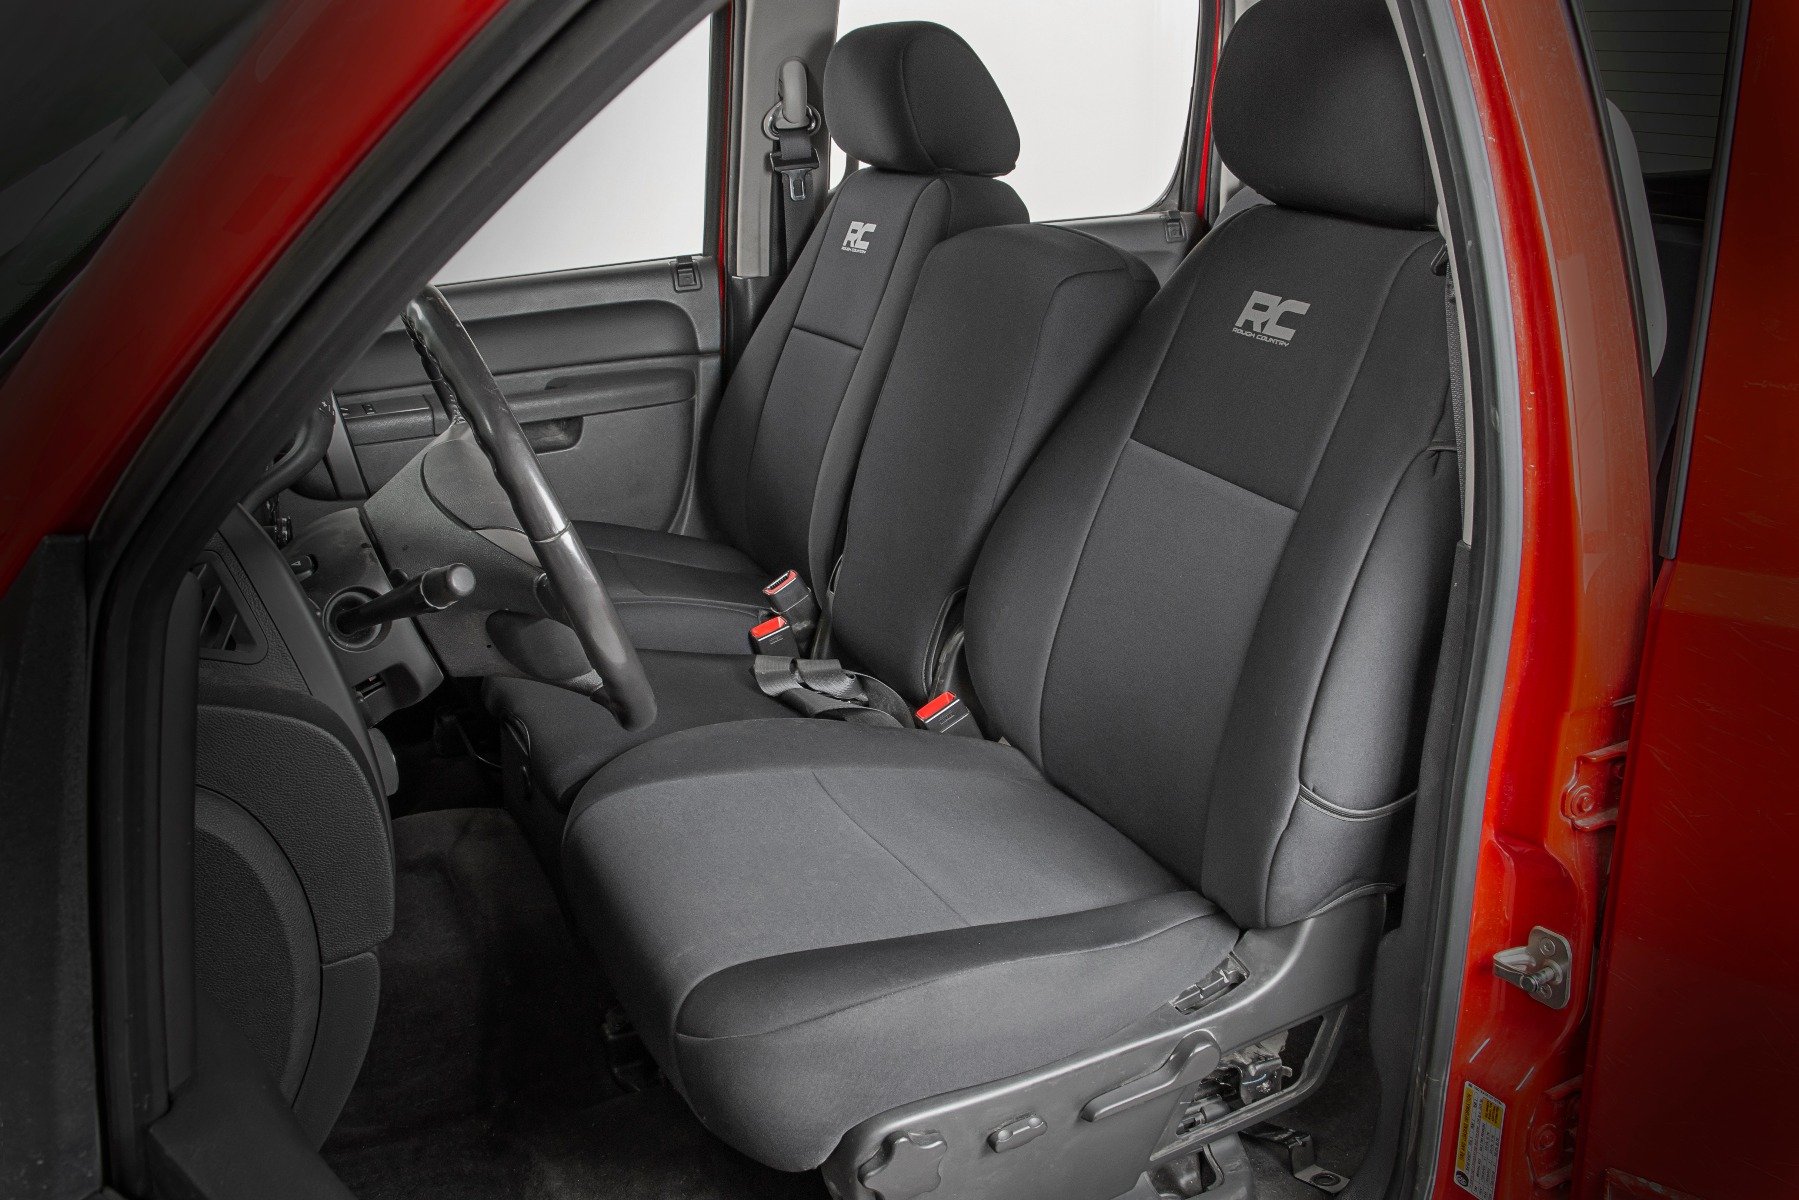 Rough Country Neoprene Front Rear Seat Covers for 07-13 Chevy Silverado 1500, 11-13 2500 HD, 91033 Fits select: 2007-2013 CHEVROLET SILVERADO, 2007-2013 GMC SIERRA - image 3 of 4